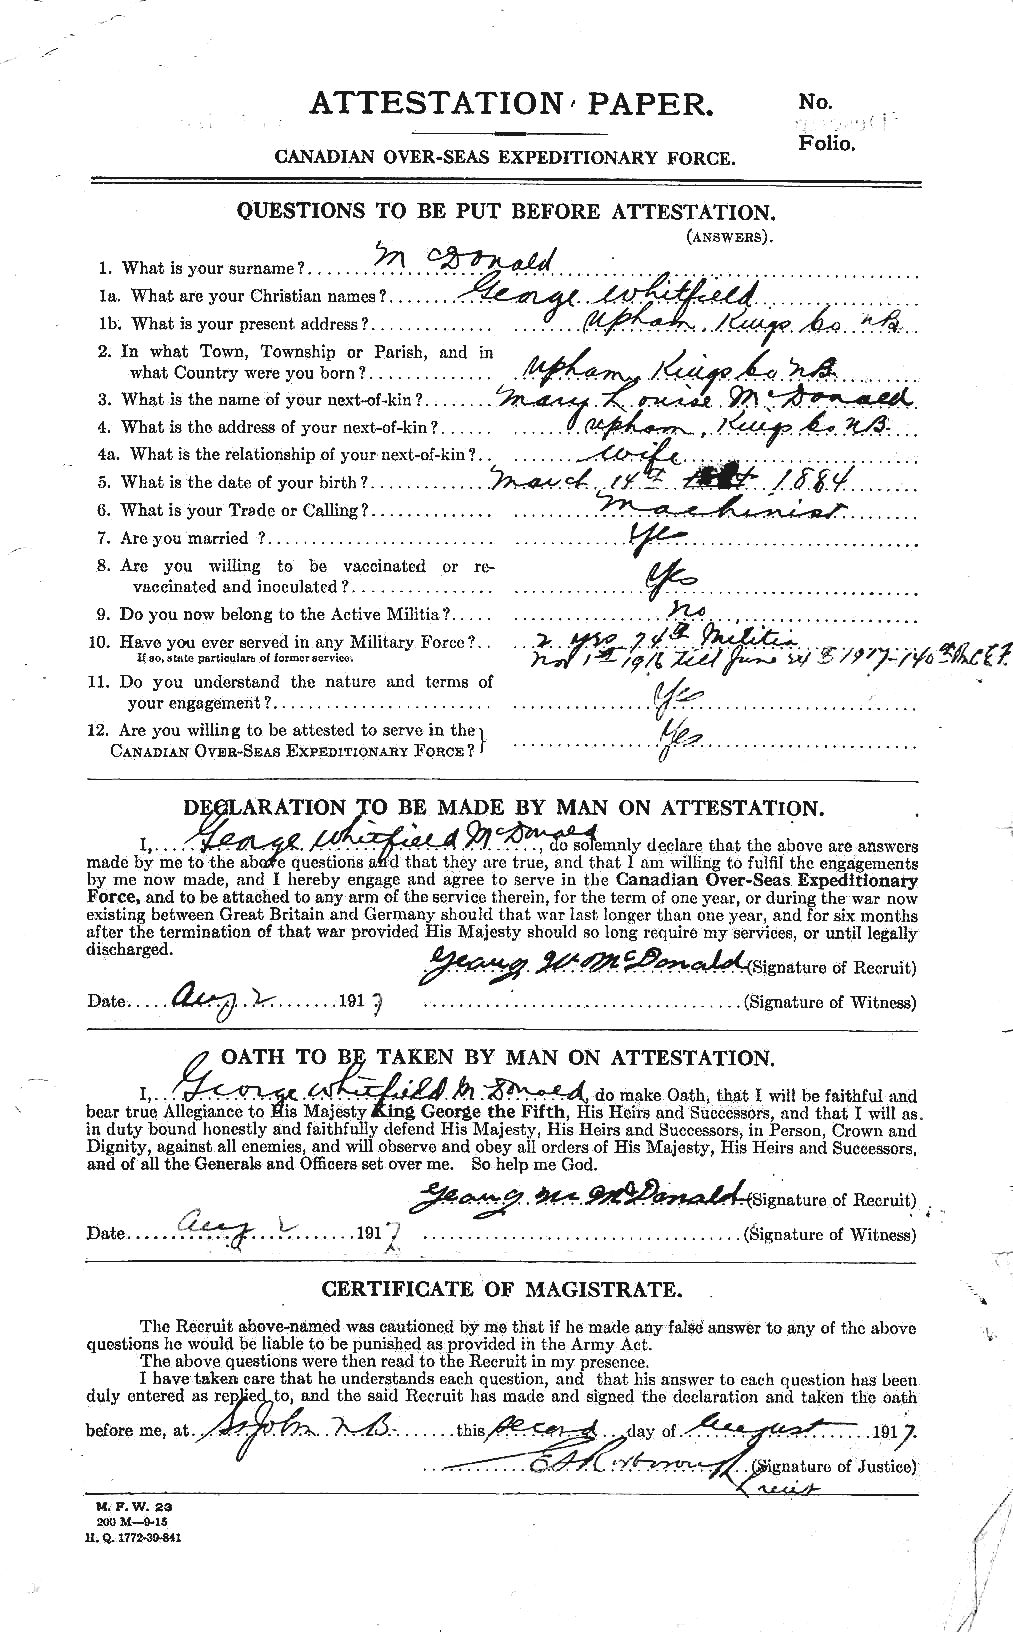 Personnel Records of the First World War - CEF 518867a